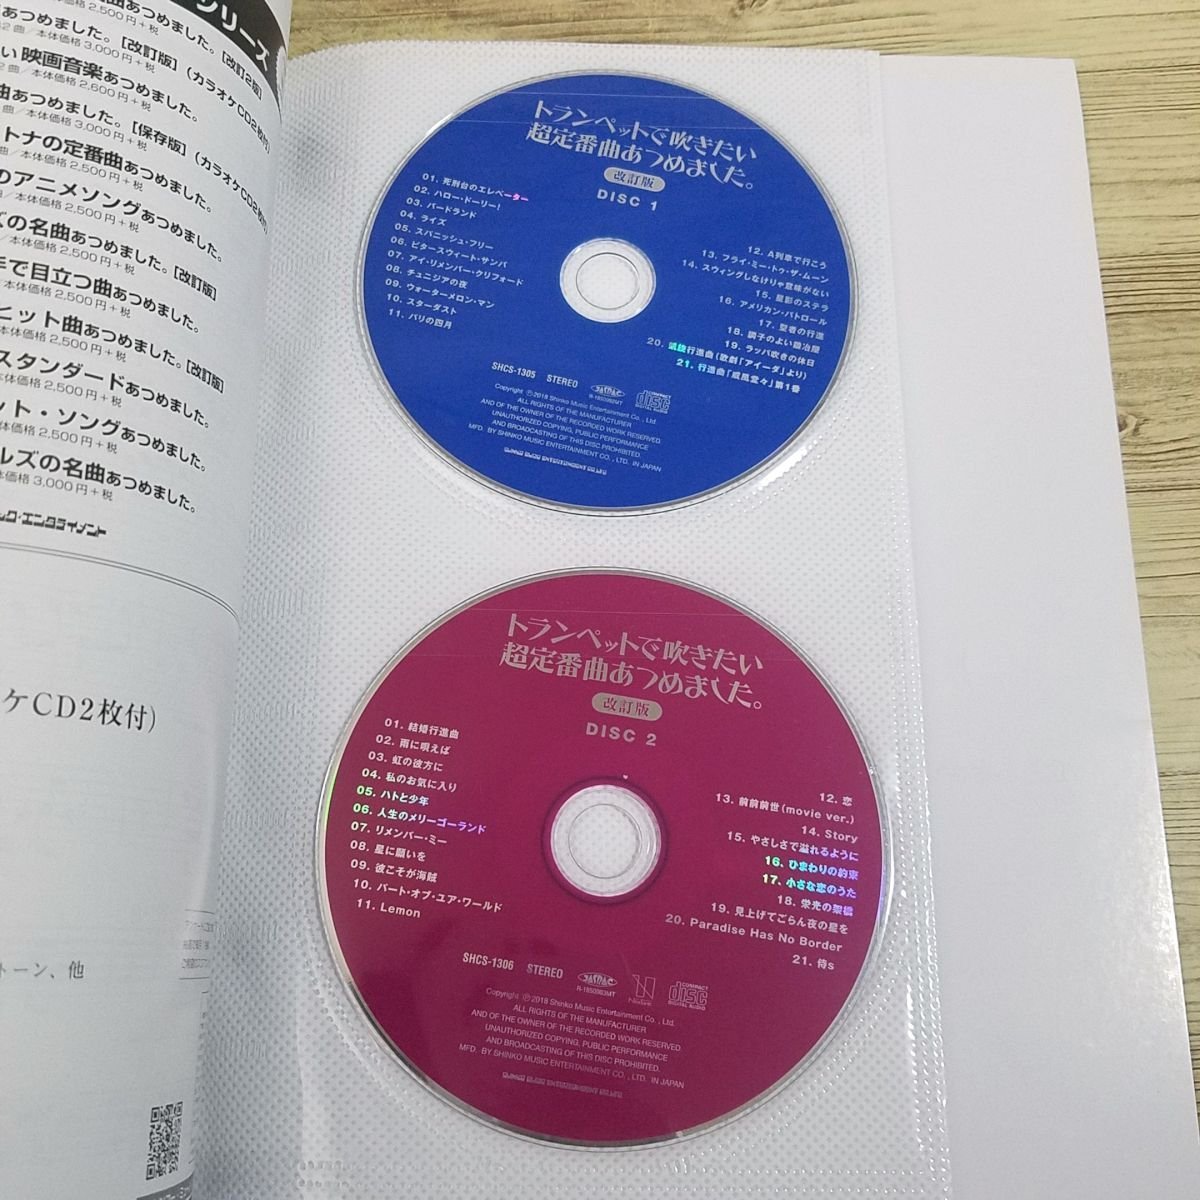  musical score [ trumpet . blow . want super standard bending ... did. modified . version ( karaoke CD2 sheets attaching )] 42 bending 2018 year issue J-POP Jazz western-style music film music [ postage 180